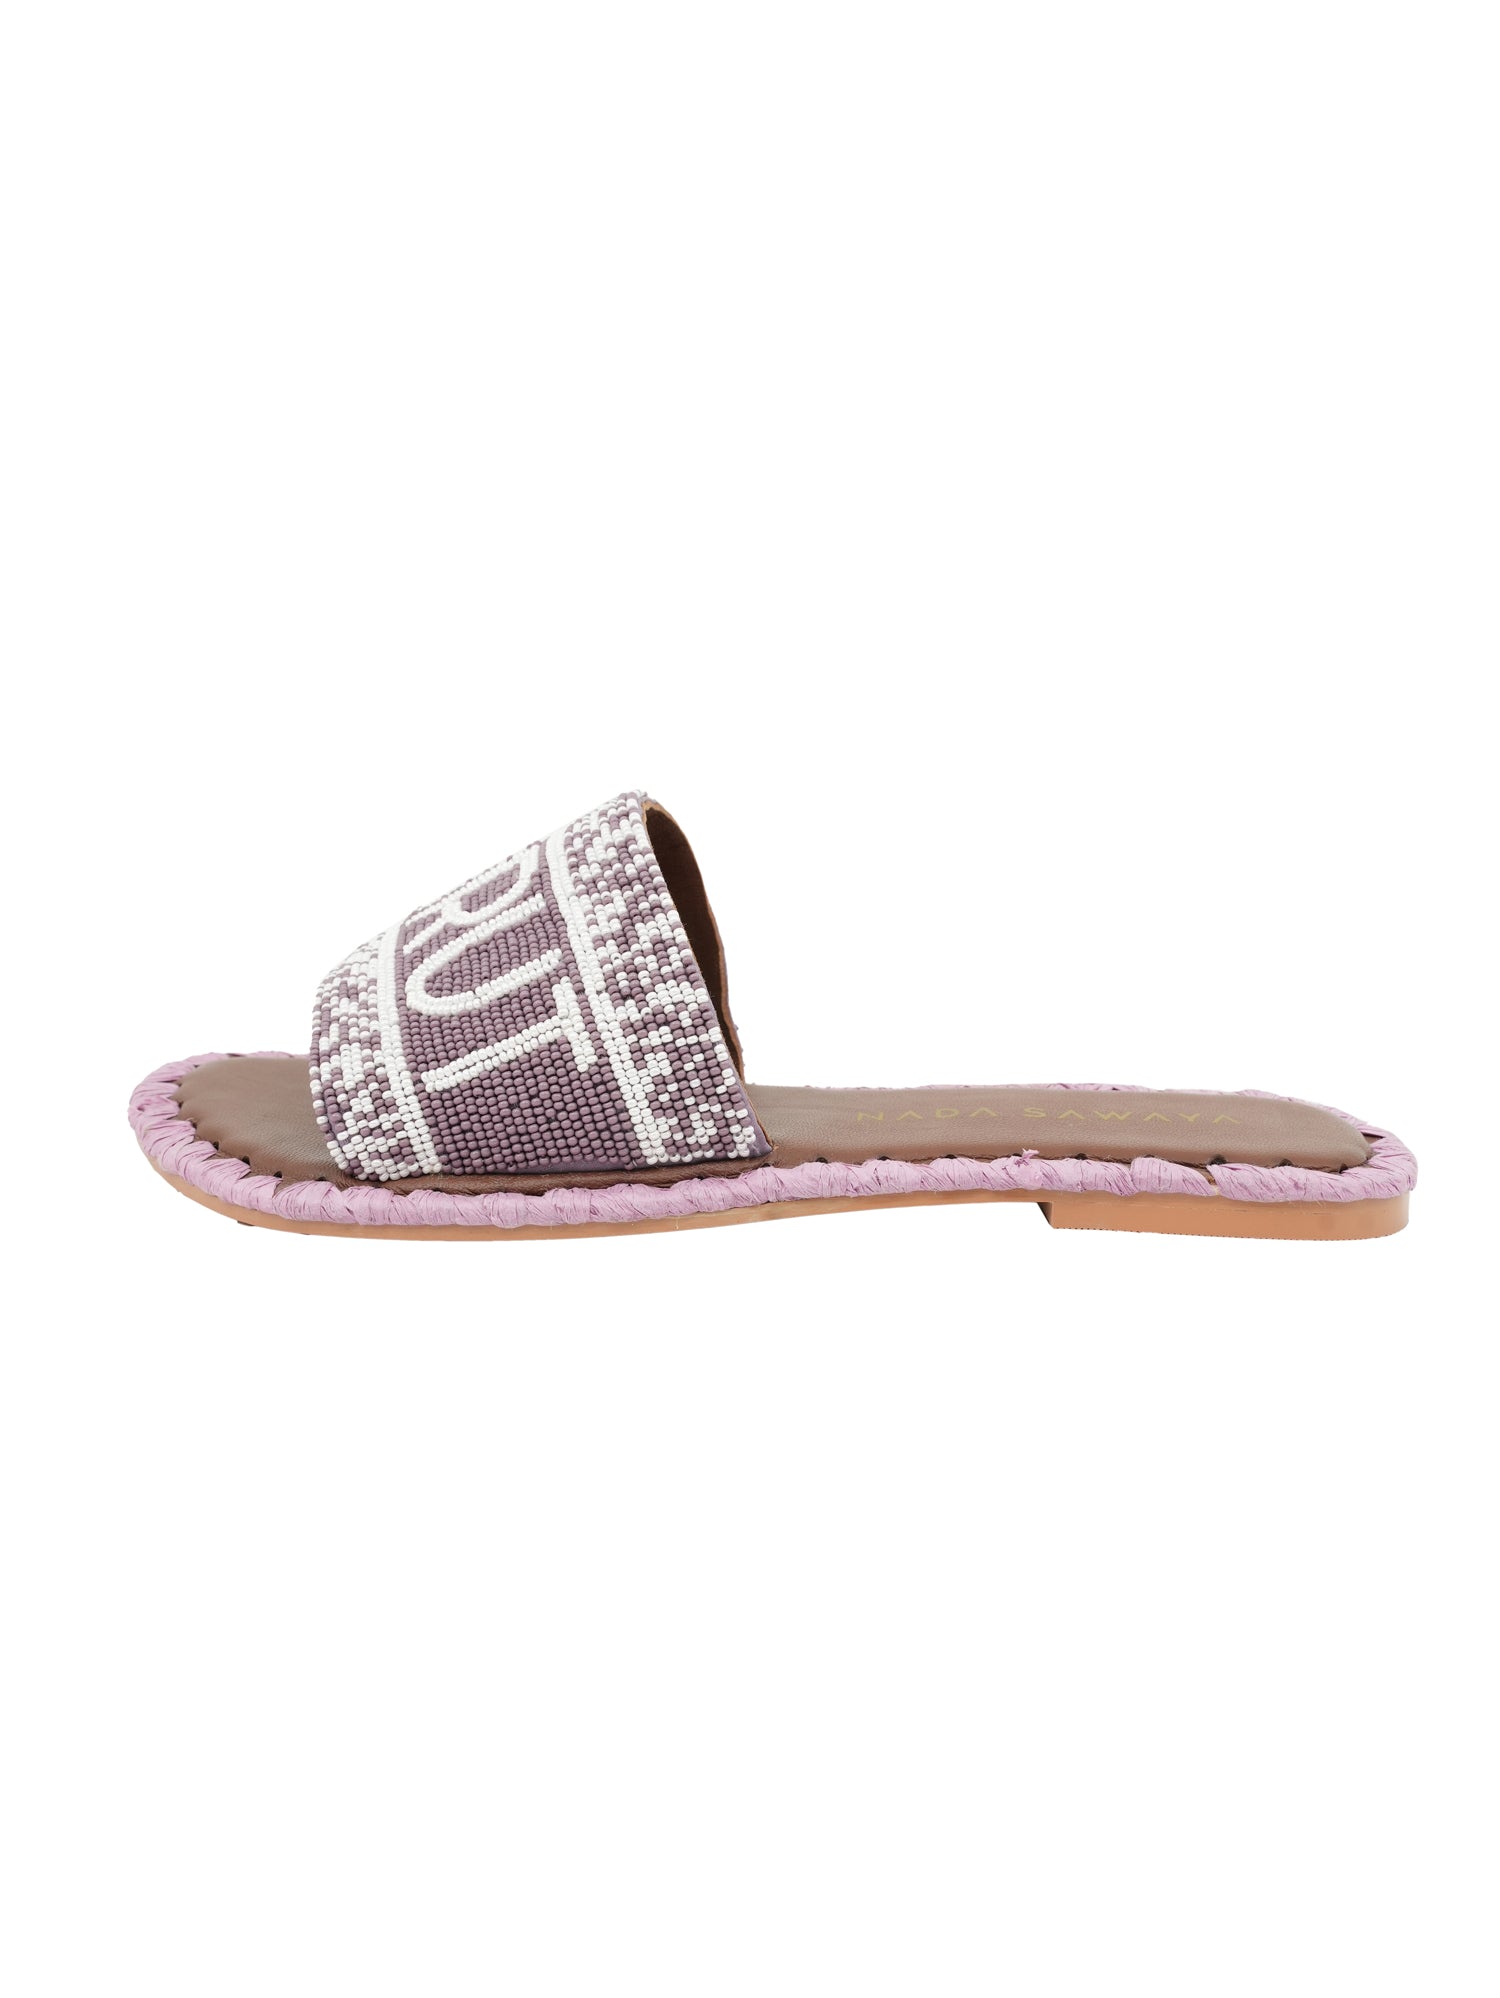 Beirut Beaded Sandals - Lilac